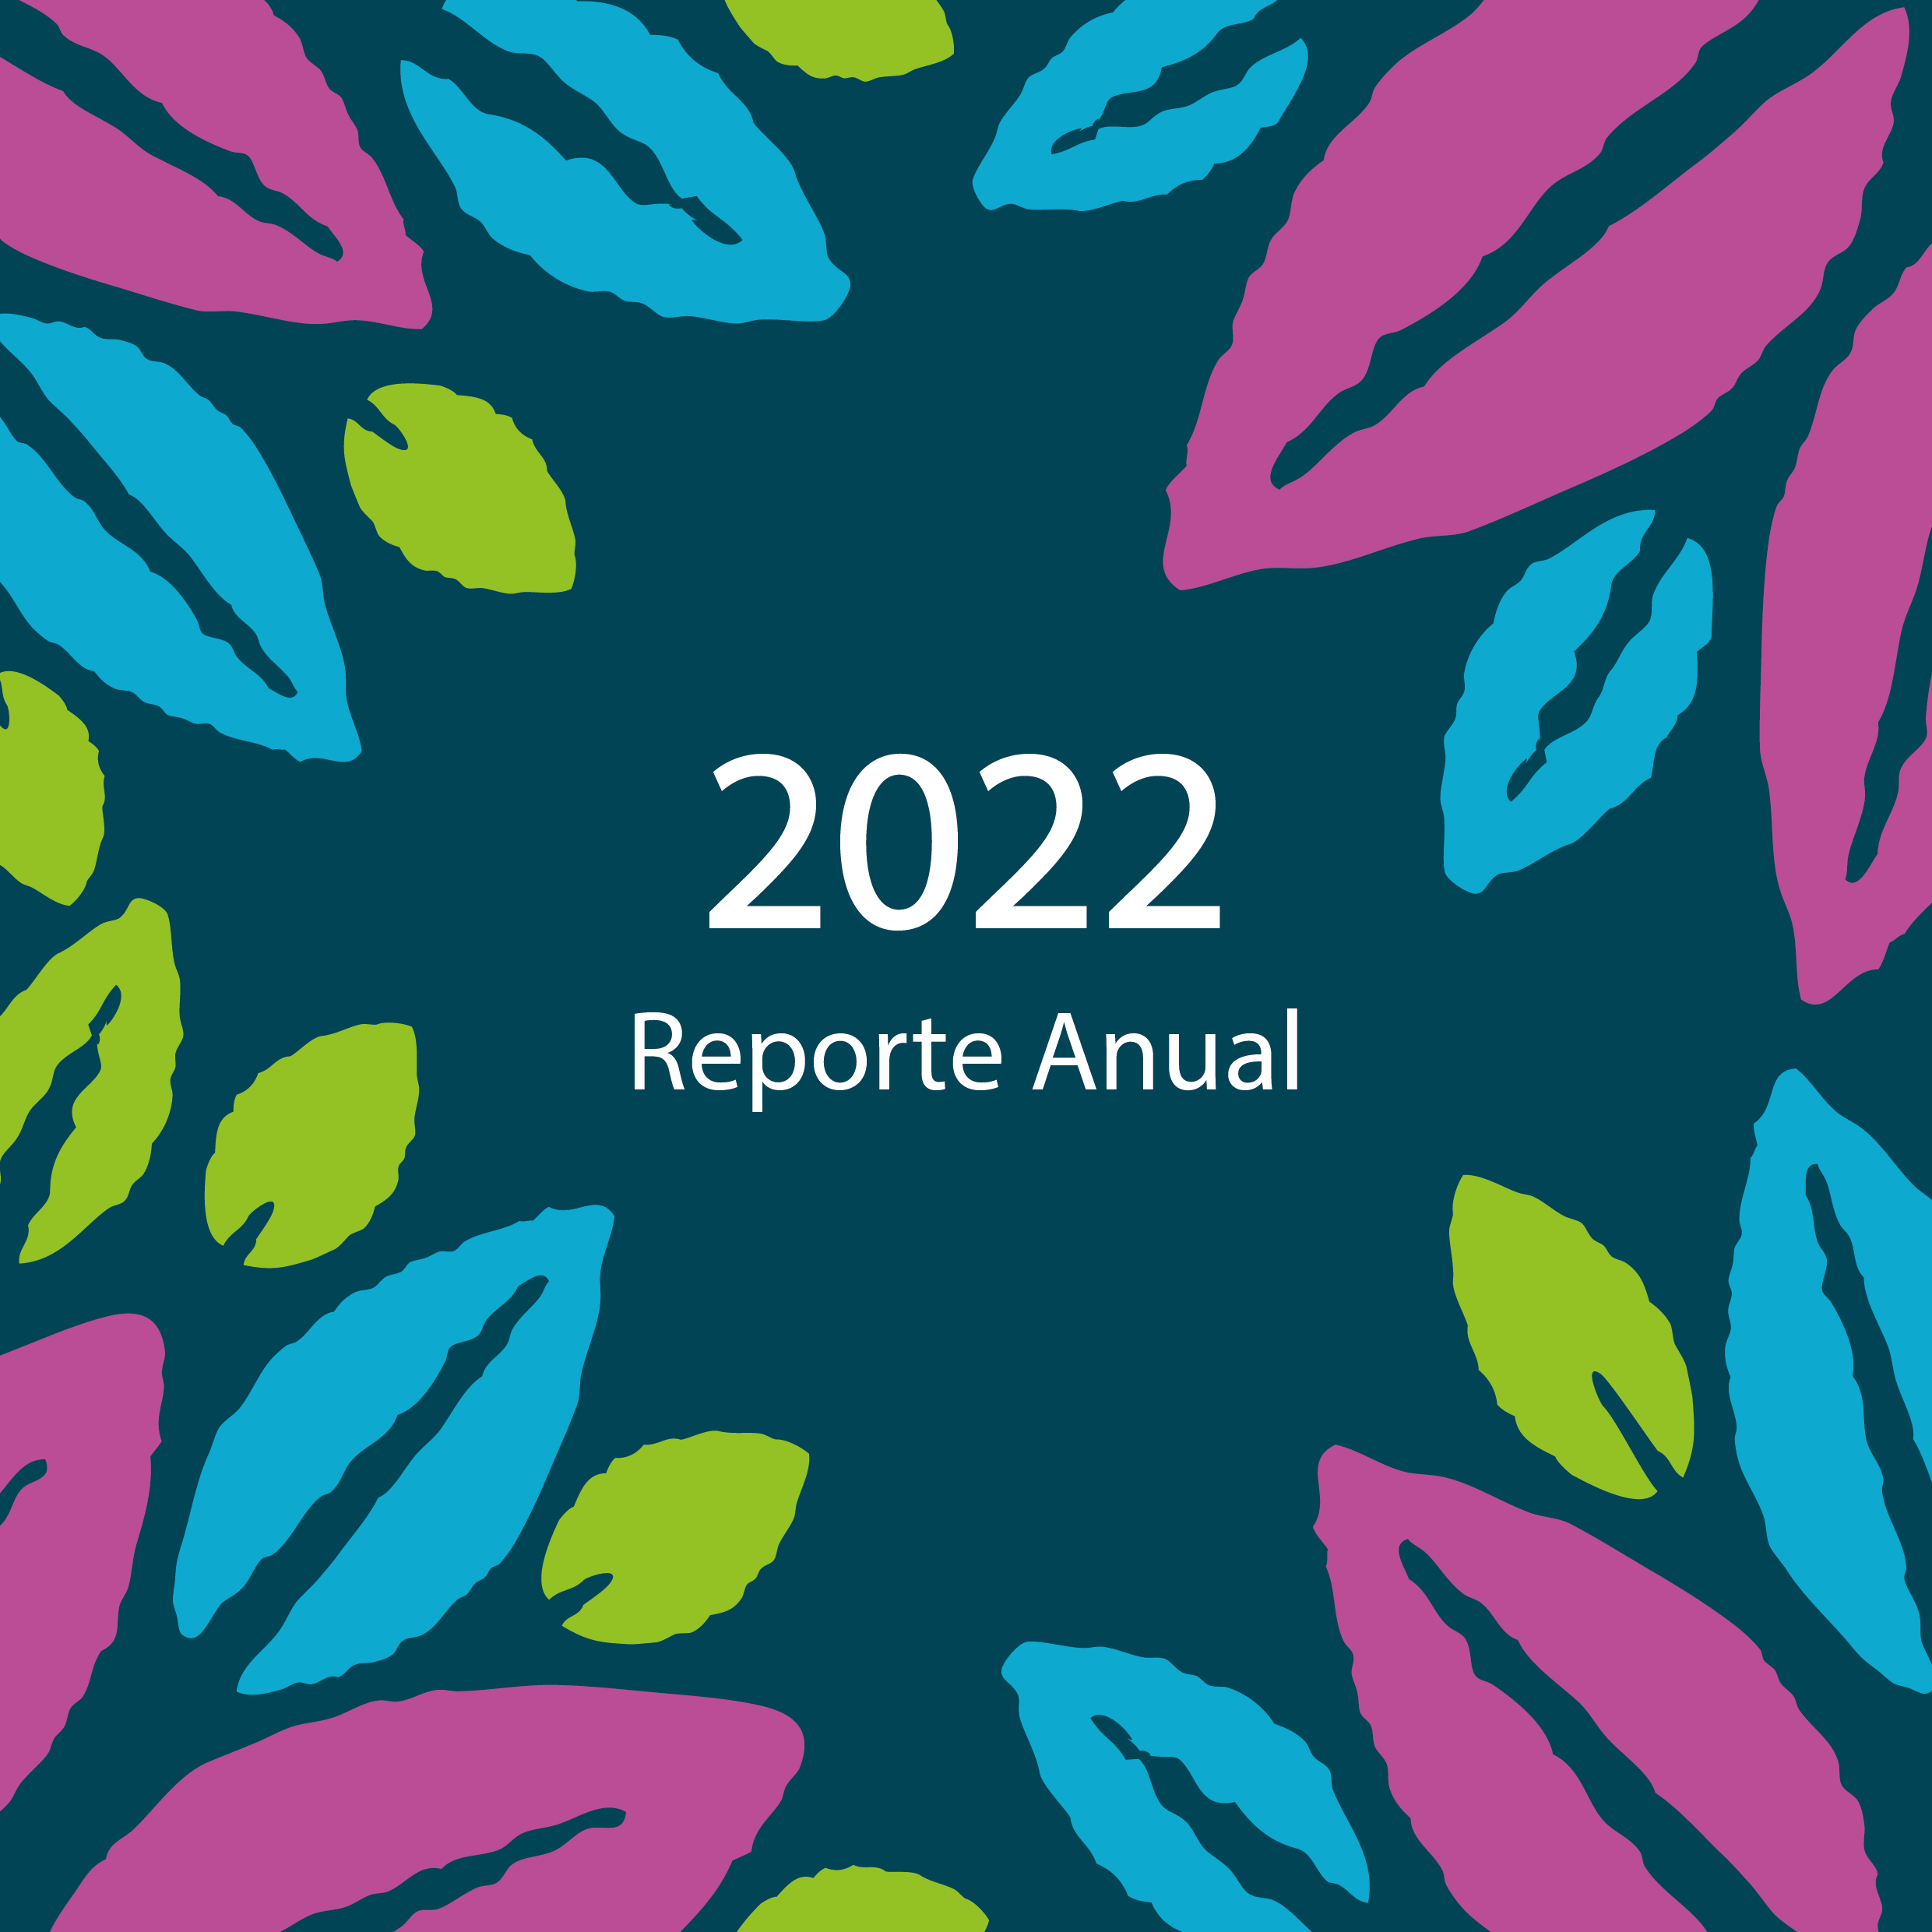 Annual report 2020 - editable-01.png